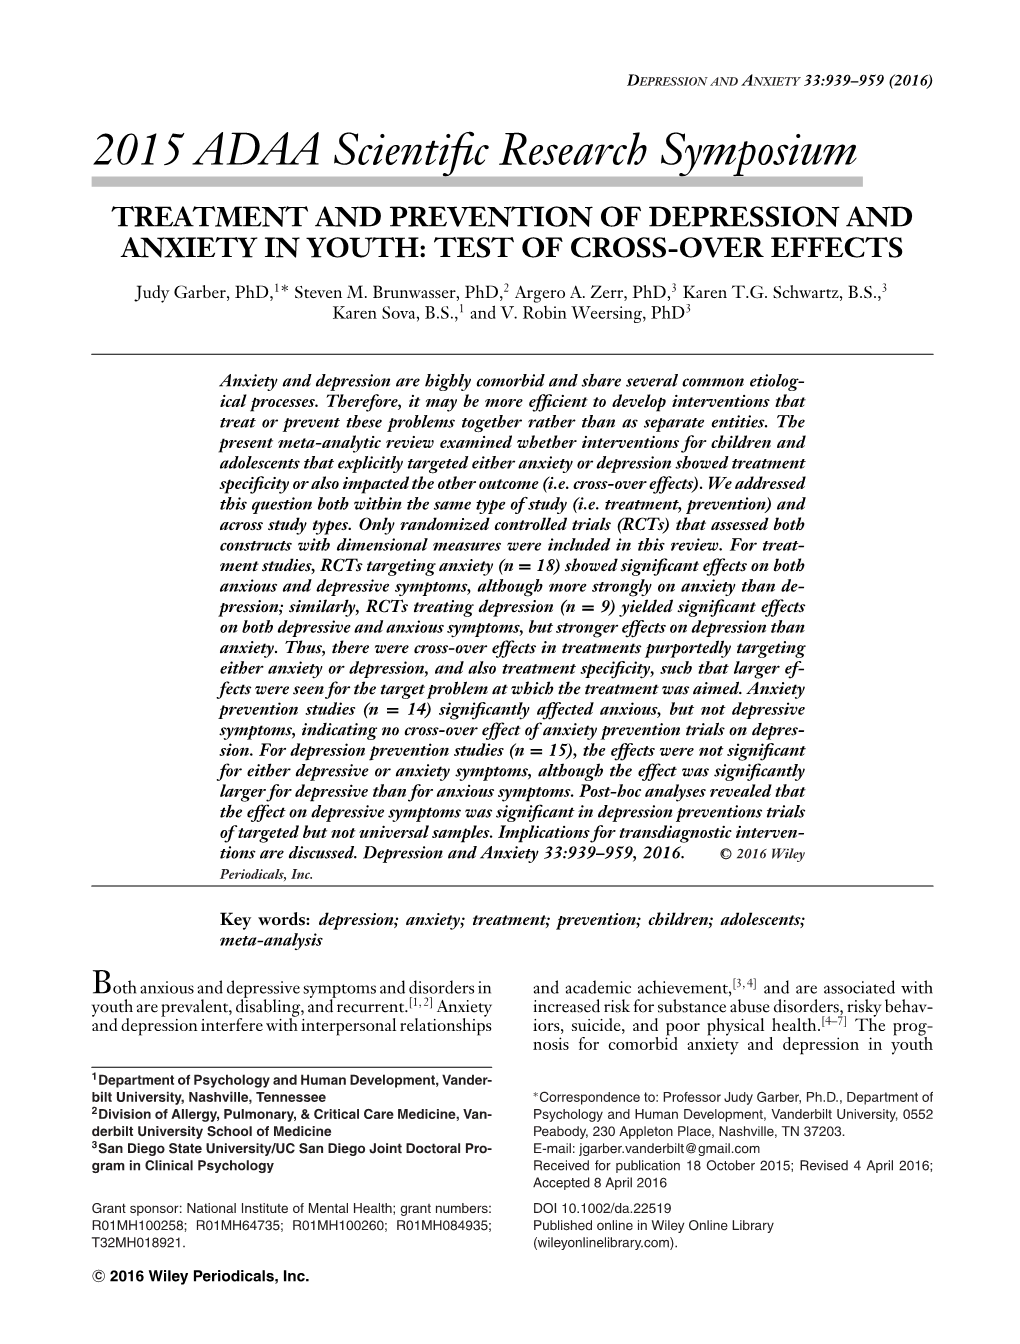 TREATMENT and PREVENTION of DEPRESSION and ANXIETY in YOUTH: TEST of CROSS-OVER EFFECTS ∗ Judy Garber, Phd,1 Steven M